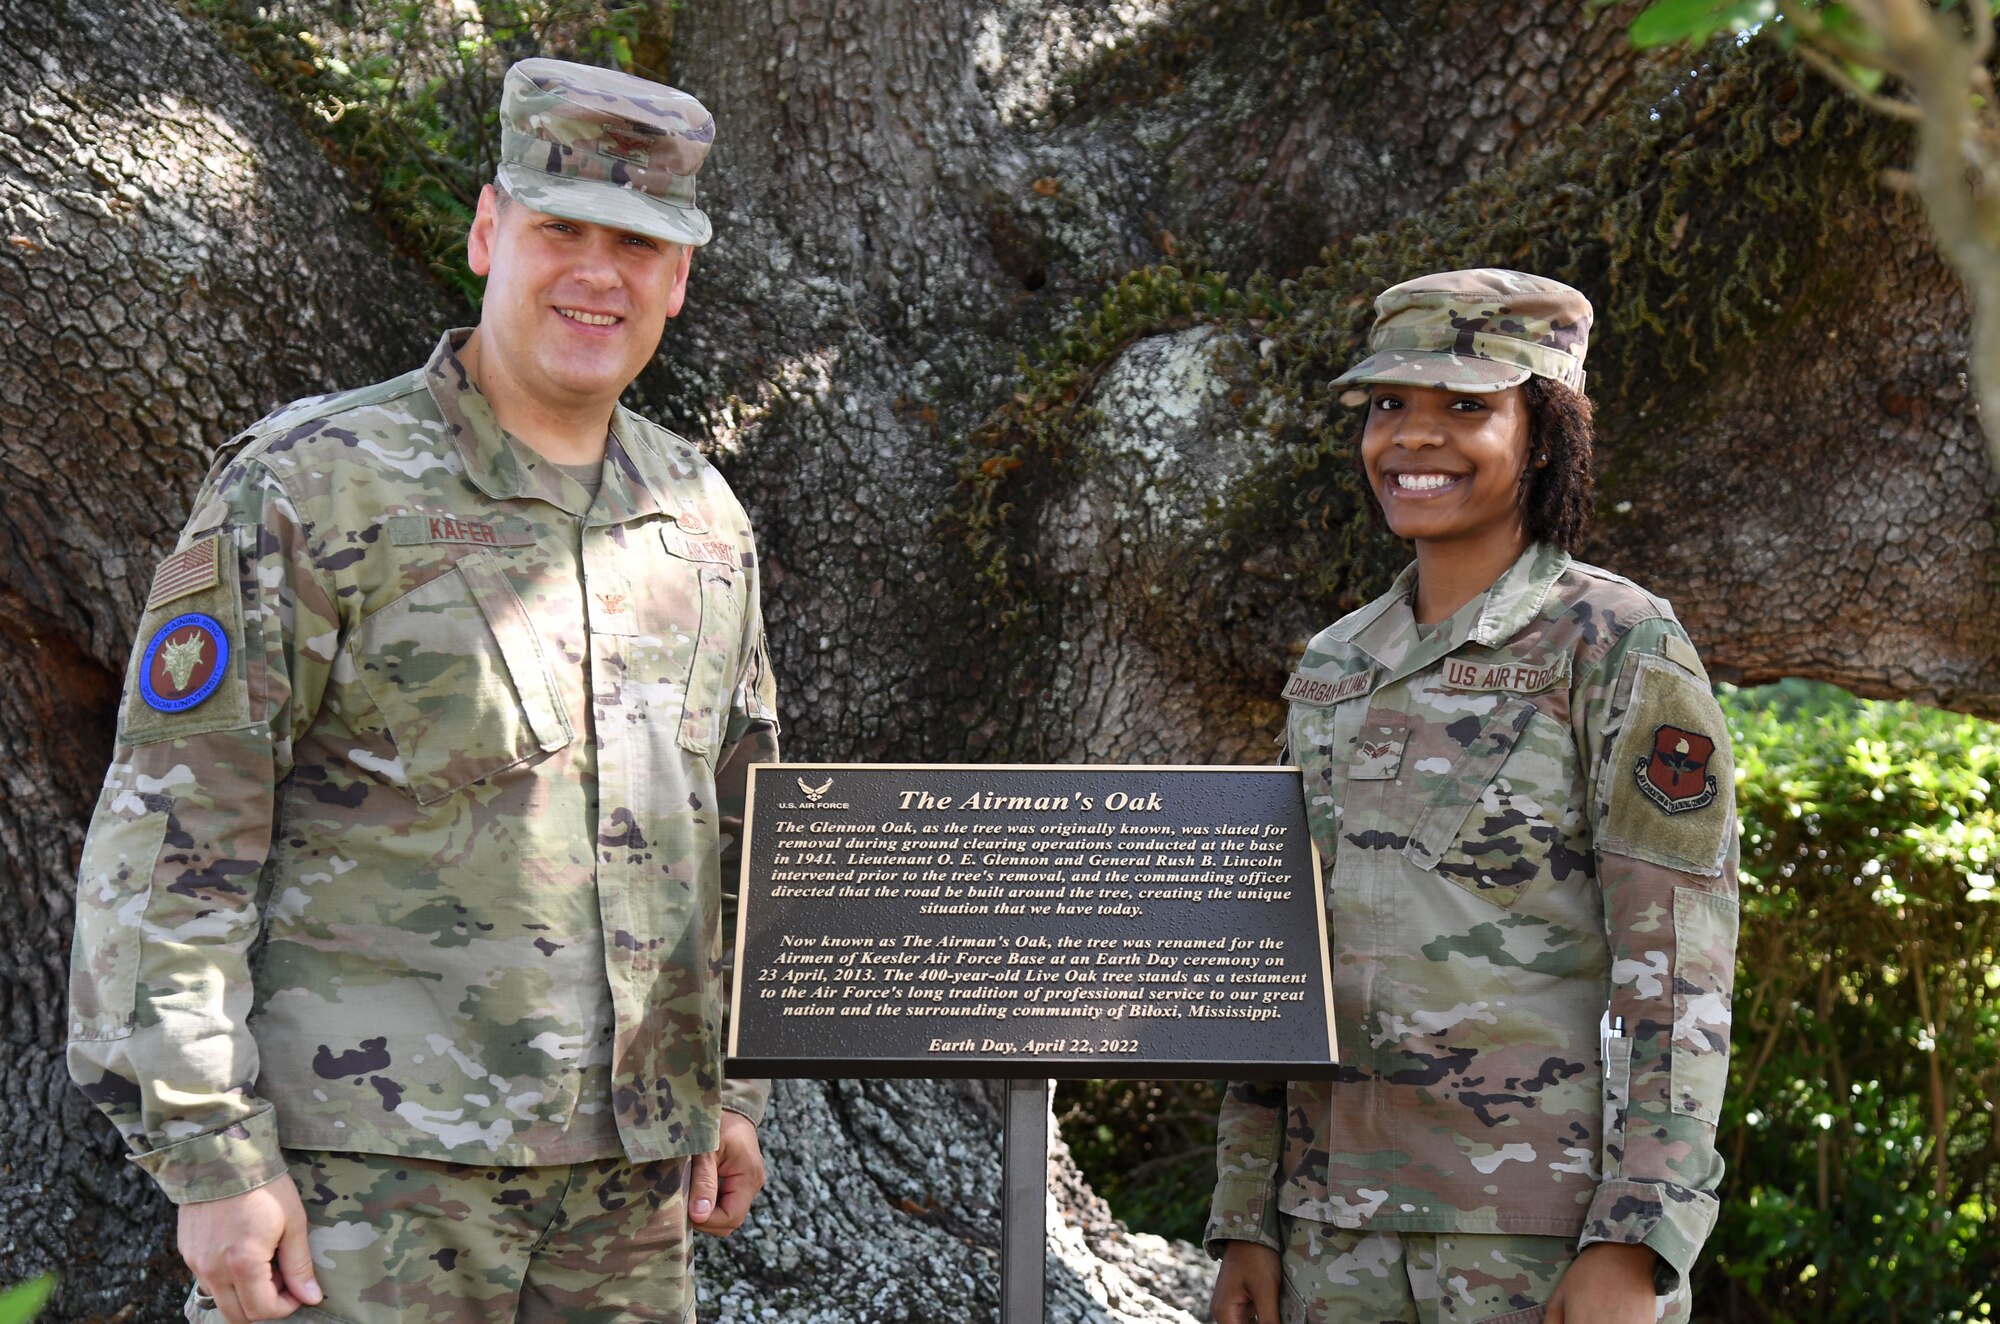 U.S. Air Force Col. James Kafer, 81st Training Wing vice commander, and Senior Airman Kaylahn Dargan-Williams, 81st Logistics Readiness Squadron logistics planner, pose for a photo with the Earth Day Airman's Oak Plaque during a ceremony at Keesler Air Force Base, Mississippi, April 22, 2022. The plaque was unveiled during the event to celebrate Earth Day, with this year's theme being “Invest in Our Planet." (U.S. Air Force photo by Kemberly Groue)